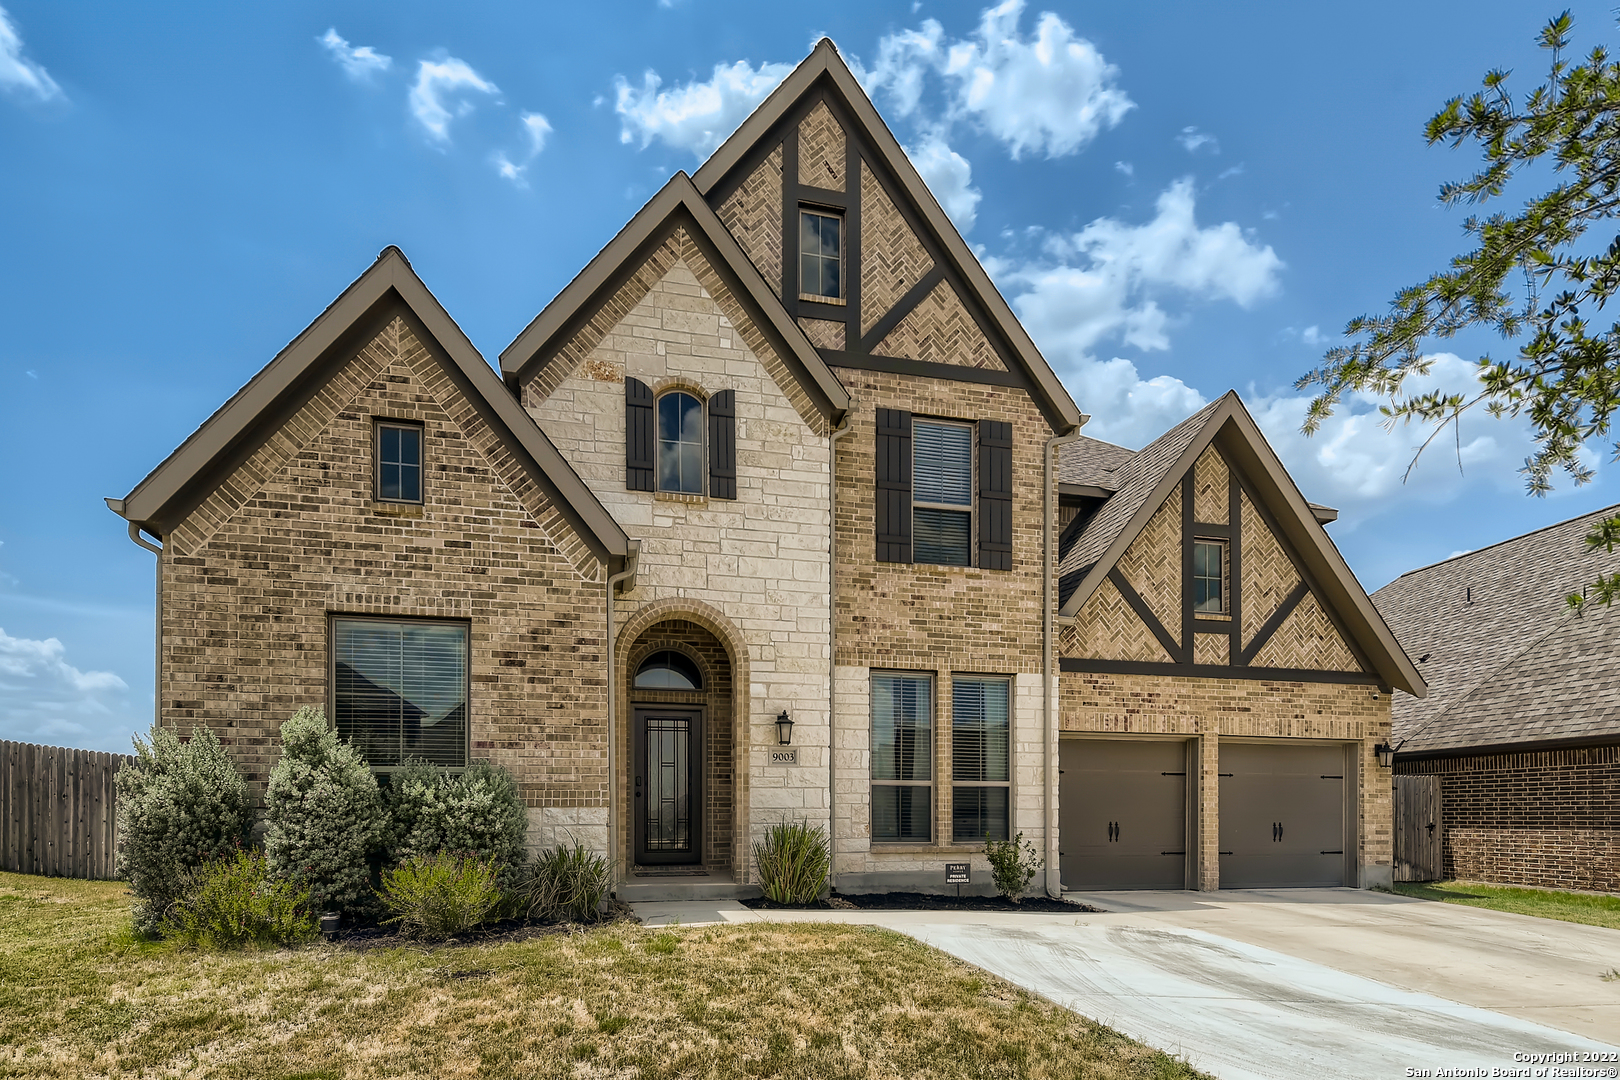 OPEN HOUSE SATURDAY SEPTEMBER 24TH FROM 12-3  *******WHY WAIT FOR THE BUILDER? BELOW NEW BUILD BASE PRICE WITH TONS OF UPGRADES! LOCK IN YOUR INTEREST RATE NOW! This unique Perry Home floor plan, is a rarity in the Kallison Ranch subdivision. Home is located across from the communities' amenities (pool and park). Massive backyard with stone back fence, has a 10x10 slab, ready for a shed; and is perfect for a pool, with plenty of room to spare. Covered back patio with outdoor ceiling fan and gas hookup, ready for an outdoor kitchen.  Downstairs: Mother-In-Law suite with full bath, Study with French doors, and Master Bedroom. Master bath has his and her walk-in closets and vanities, separated by a large jettison tub. Standing shower is equipped with his and her shower heads and built-in benches. Kitchen features beautiful quartz countertops, large breakfast bar, touchless faucet, Reverse Osmosis water spout, two ovens, and 5 gas burner cooktop. Extra-large, walk-in pantry. Laundry room has a walk-in storage closet, utility sink, and is large enough to fit a medium sized chest freezer and medium sized standup freezer/refrigerator.    Upstairs: 3 bedrooms, one is an ensuite. All have walk-in closets and ceiling fans. Loft/game area is open to the first floor. Media/theater room with French doors.  Other Features: Smart Home (thermostat, lights, doorbell, security). Extended driveway (parking pad). 3 car garage. Two tankless water heaters. Jason's Water Softener and Filtration (Lifetime Warranty). Motorized blinds in the great room's clerestory windows. Cast Iron spindles on staircase and railings. Front and Backyard Irrigation System. Panel box in downstairs storage/coat closet. All rooms wired with Cat 5 hookups.